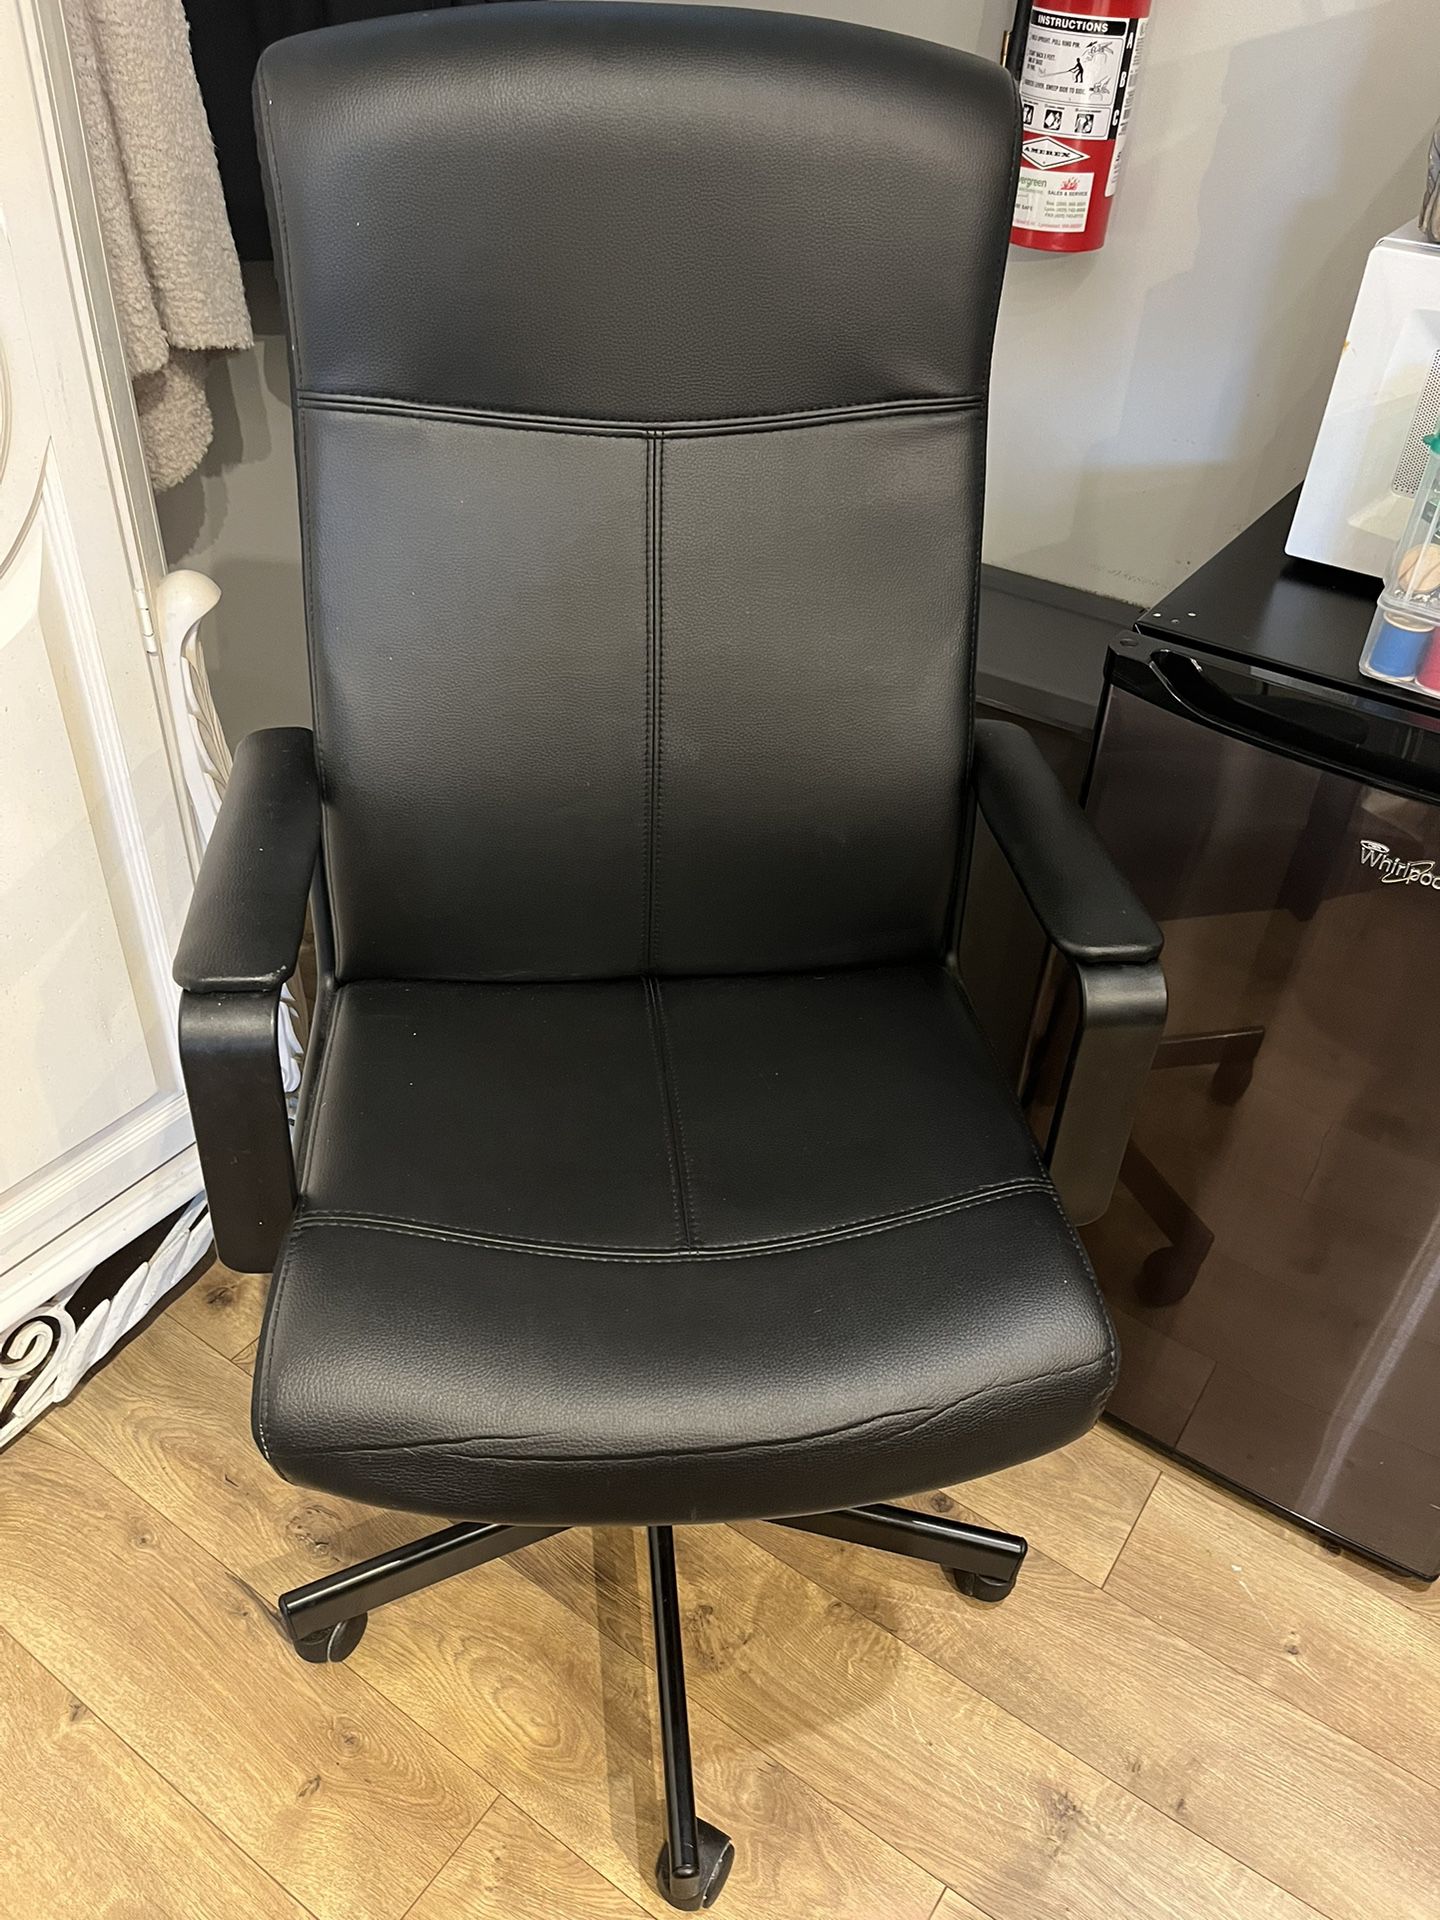 Office Chair From iKEA